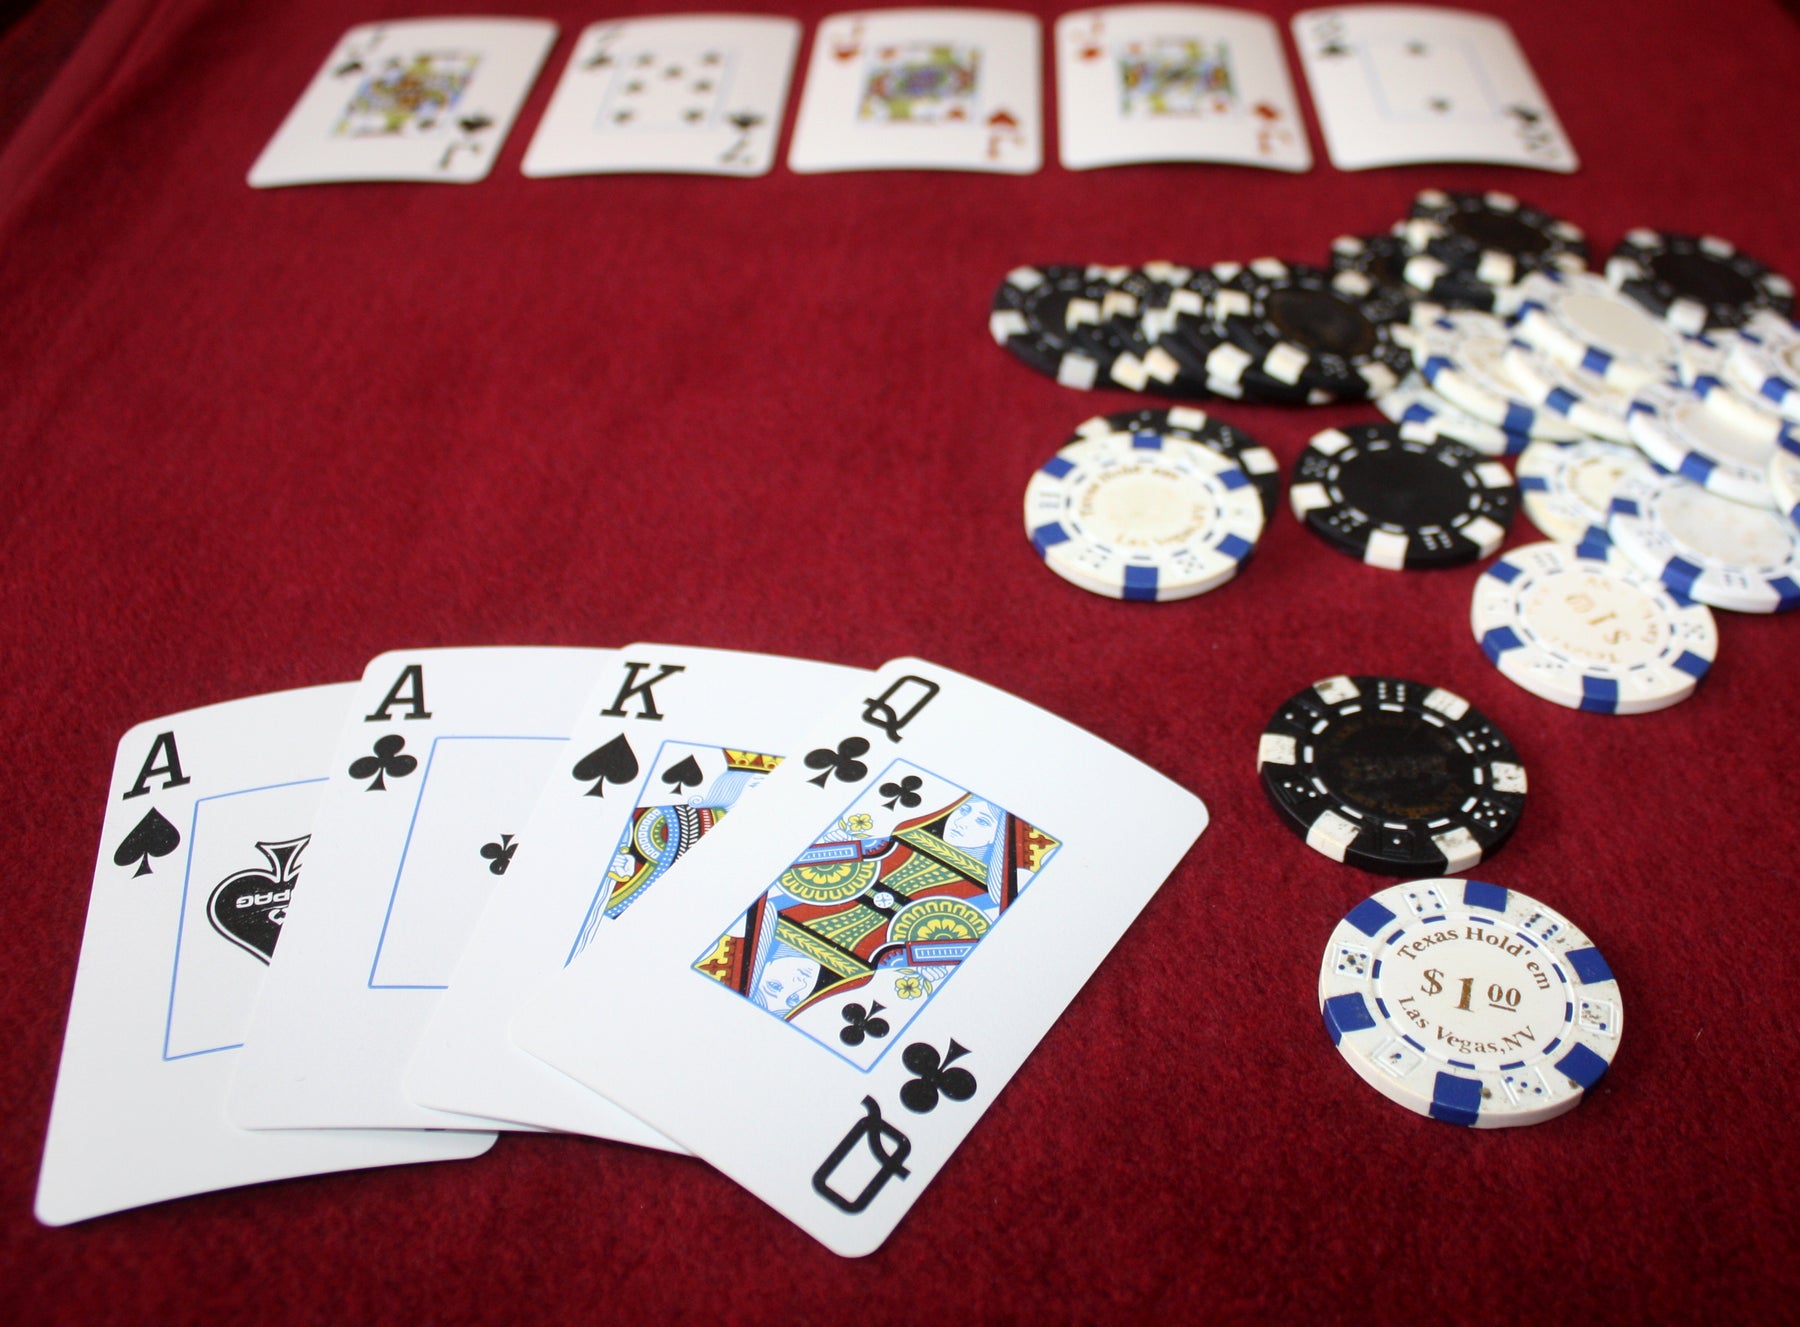 How to play Pot Limit Omaha Poker